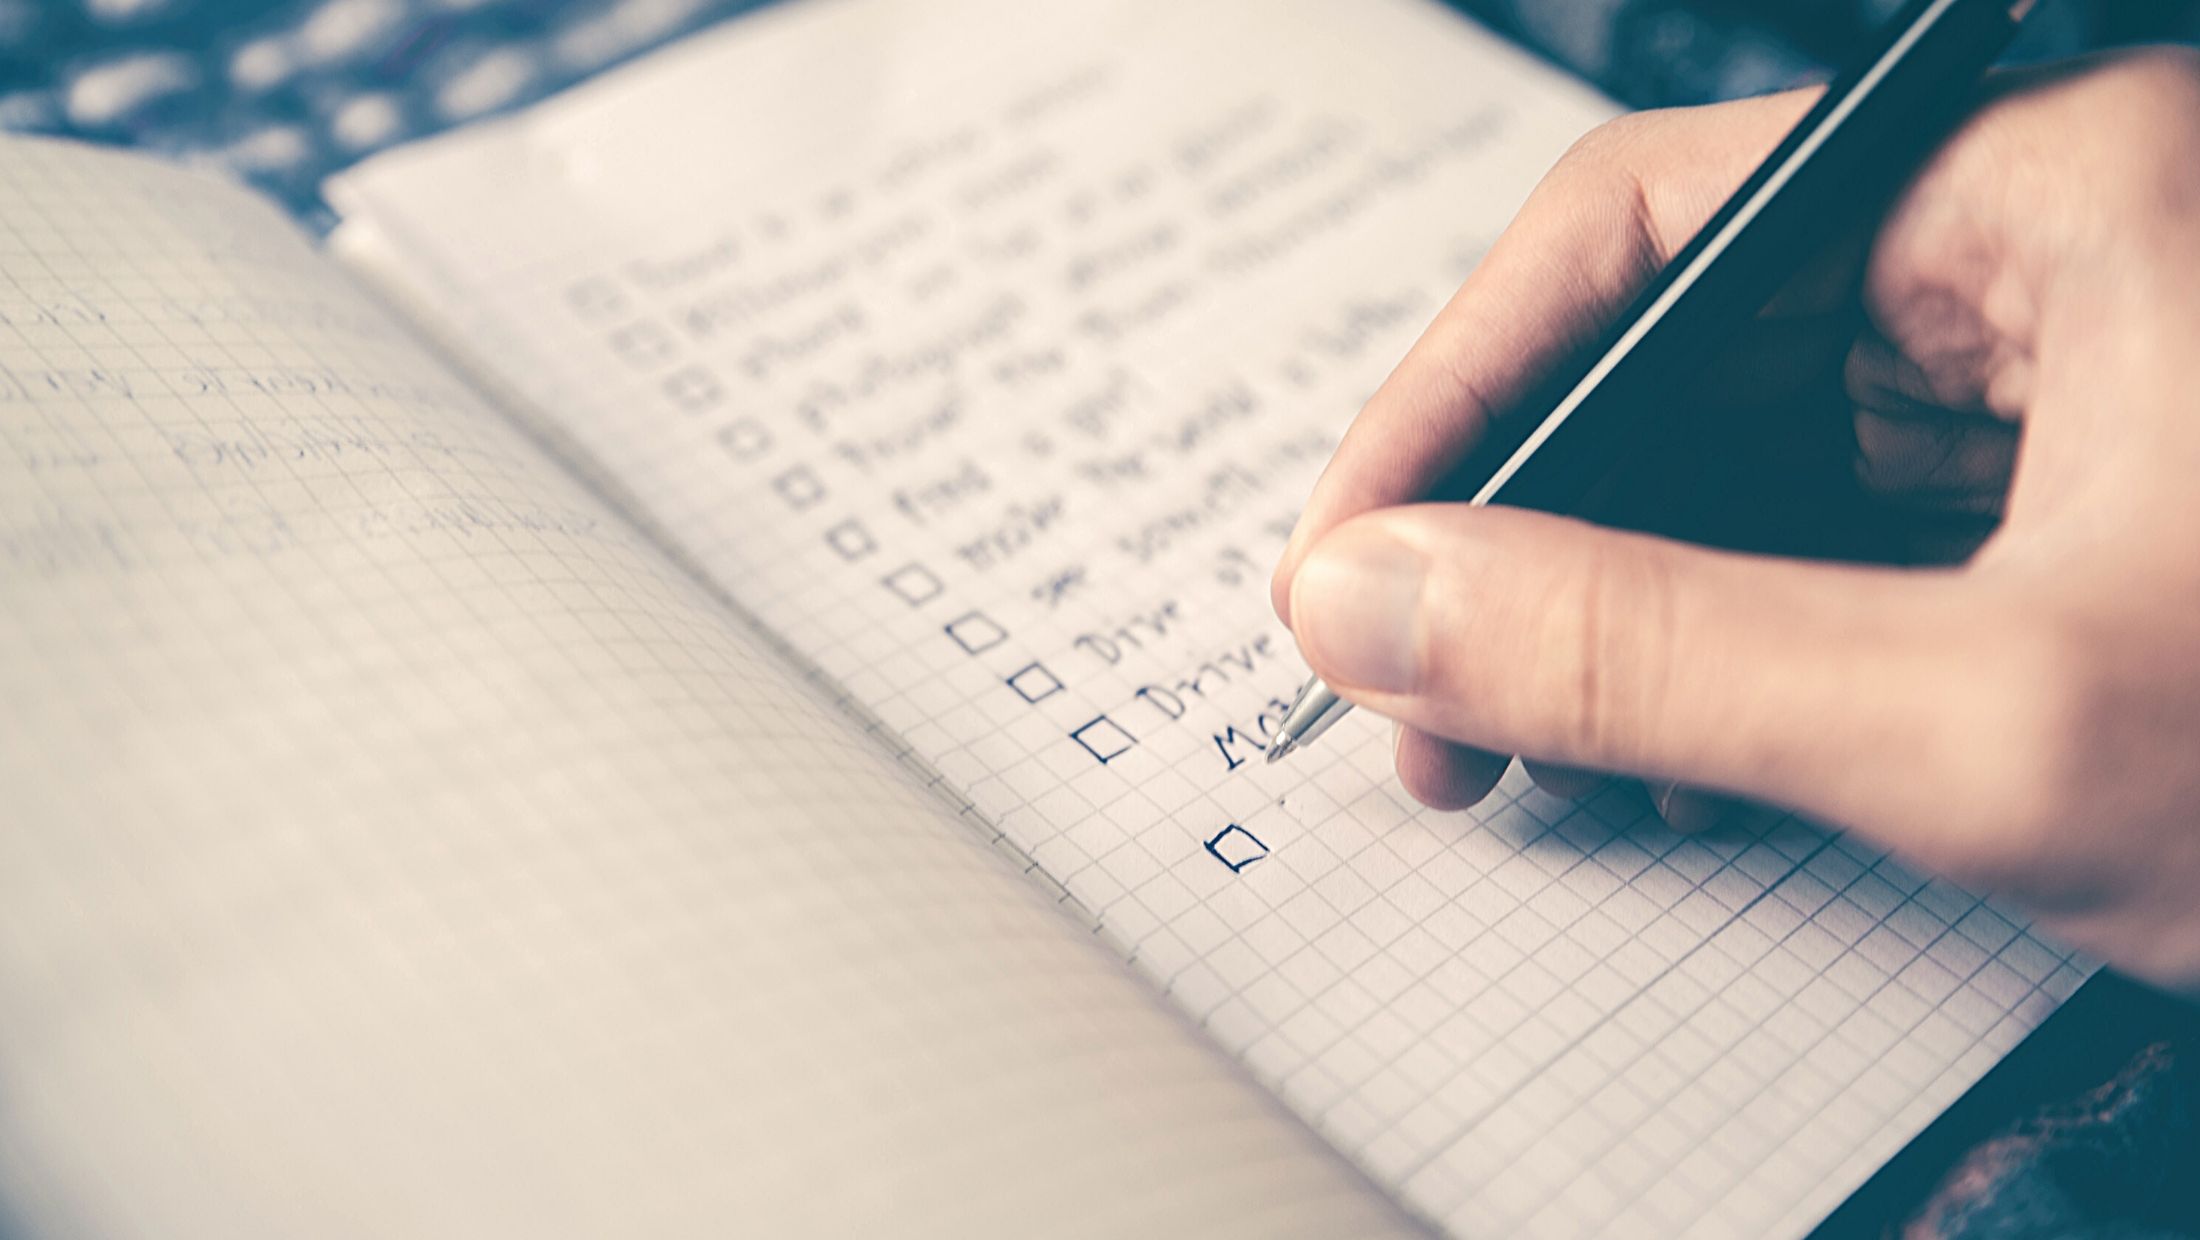 Is it time to reorganize your startup's ToDo list?